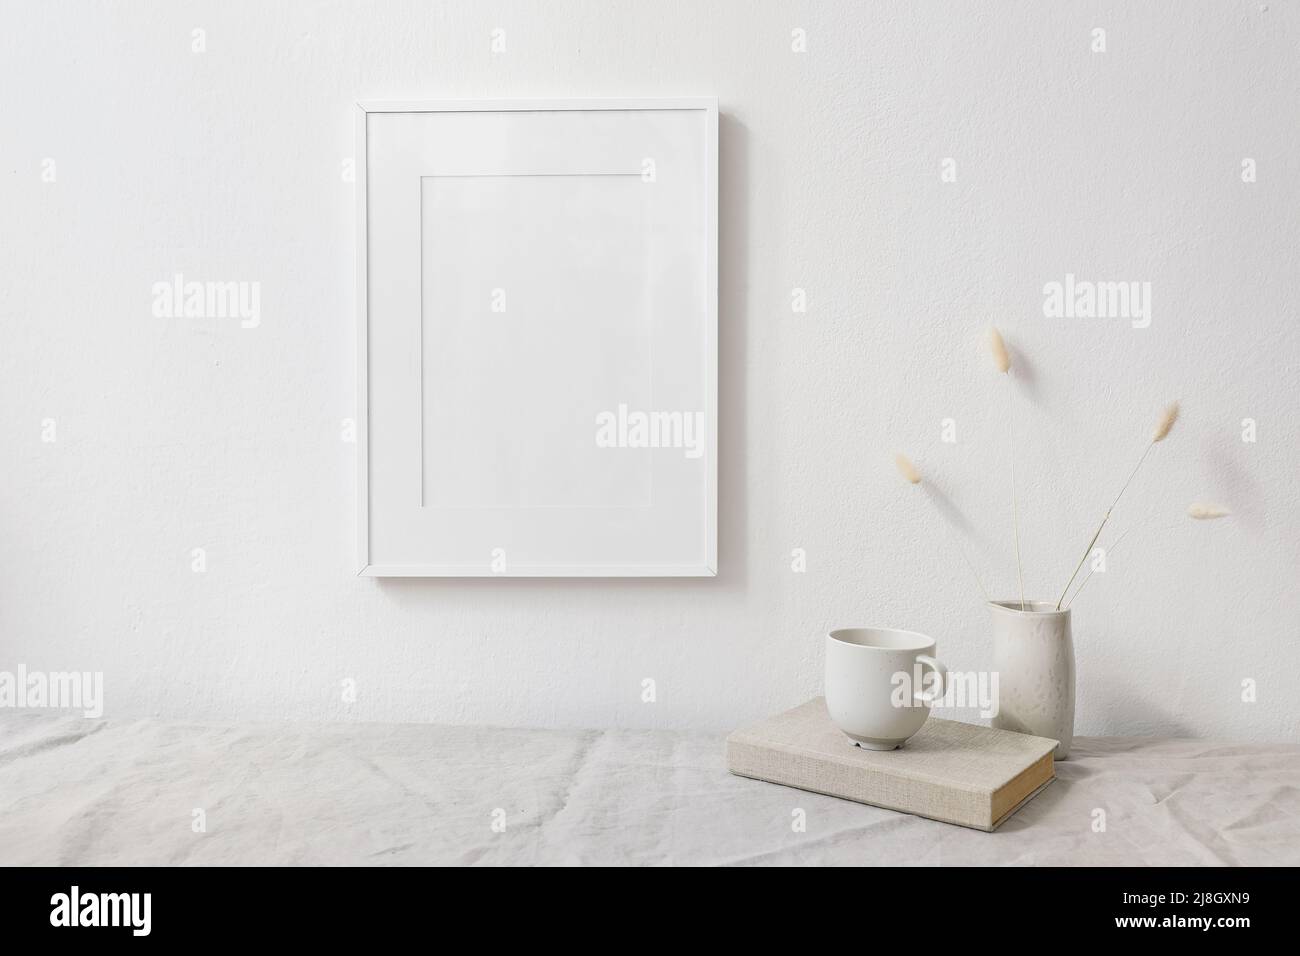 Neutral breakfast still life scene. White wooden picture frame mockup. Vase with dry lagurus bunny tail grass. Cup of coffee on book. Linen table Stock Photo